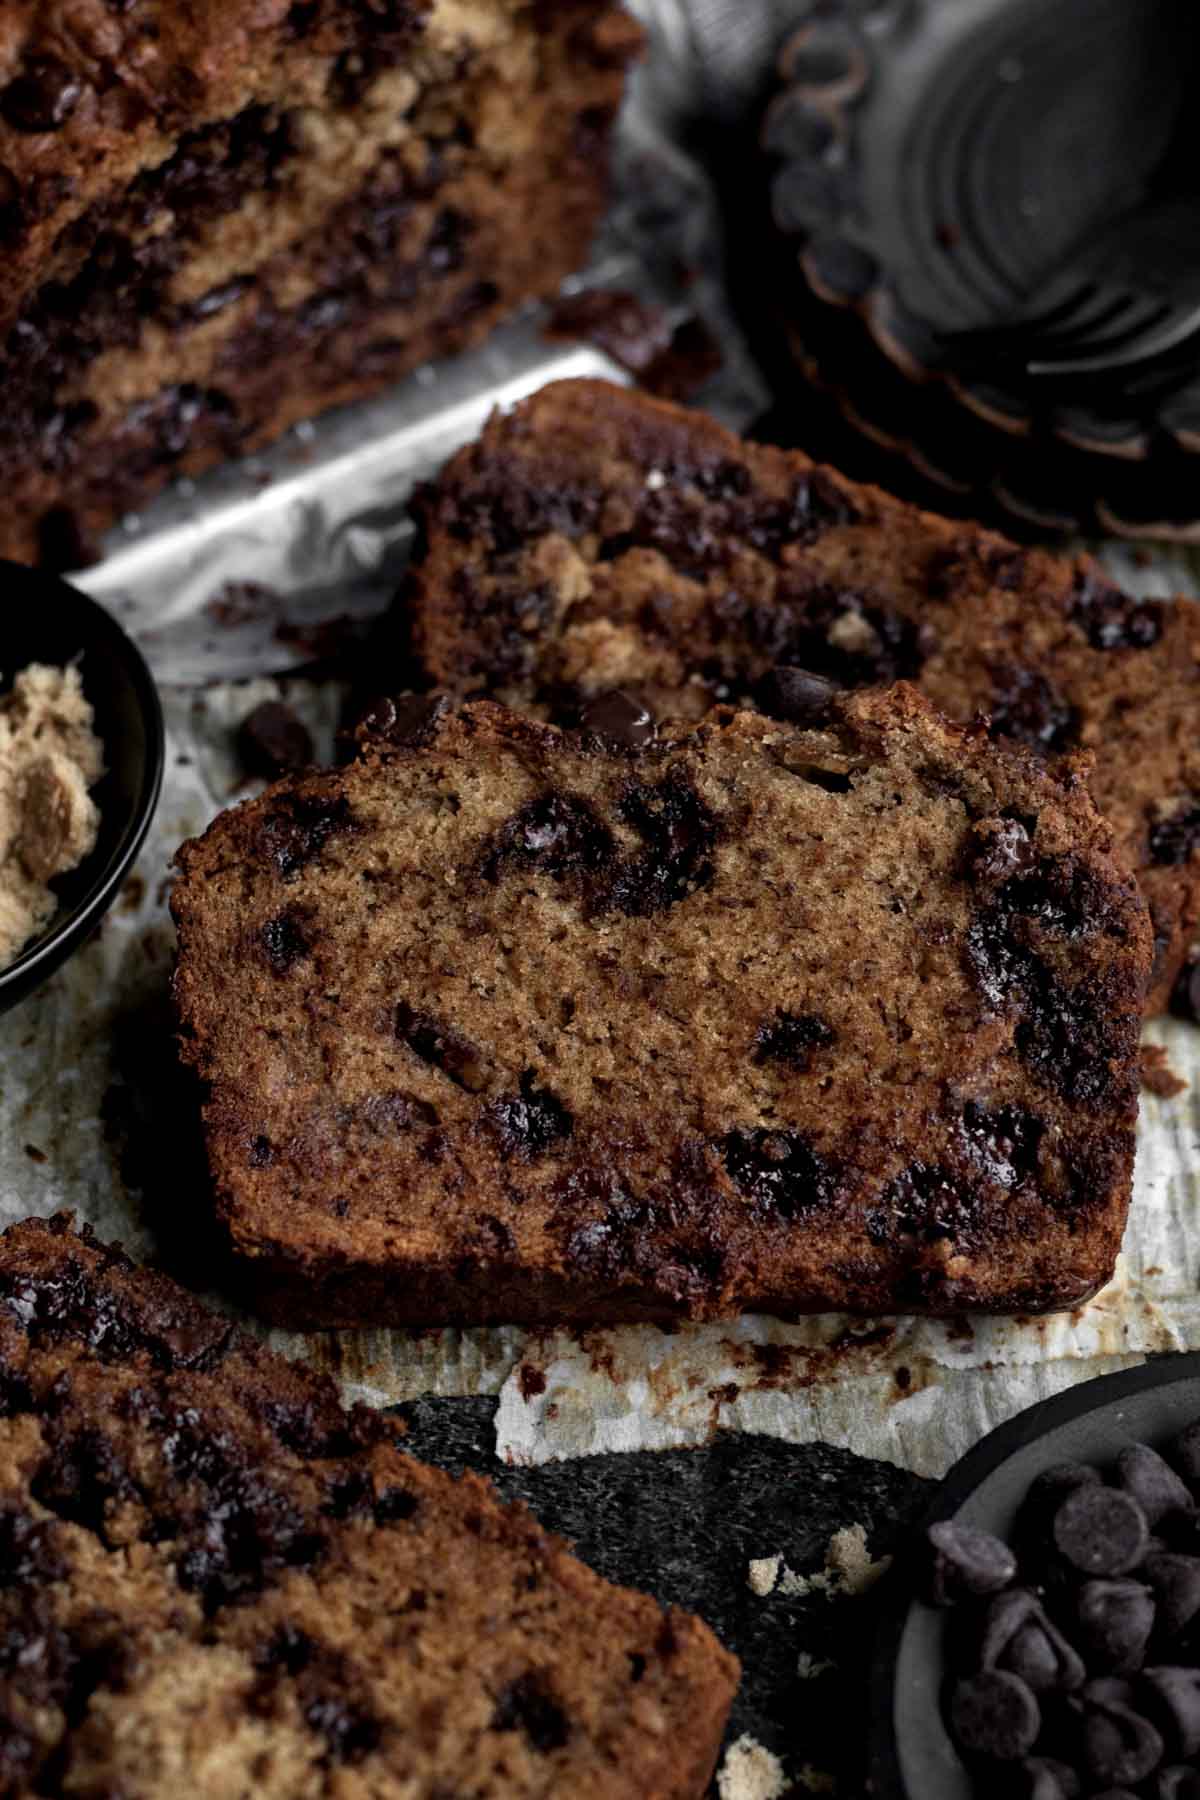 Dark punctures of chocolate perforate the banana bread slices.